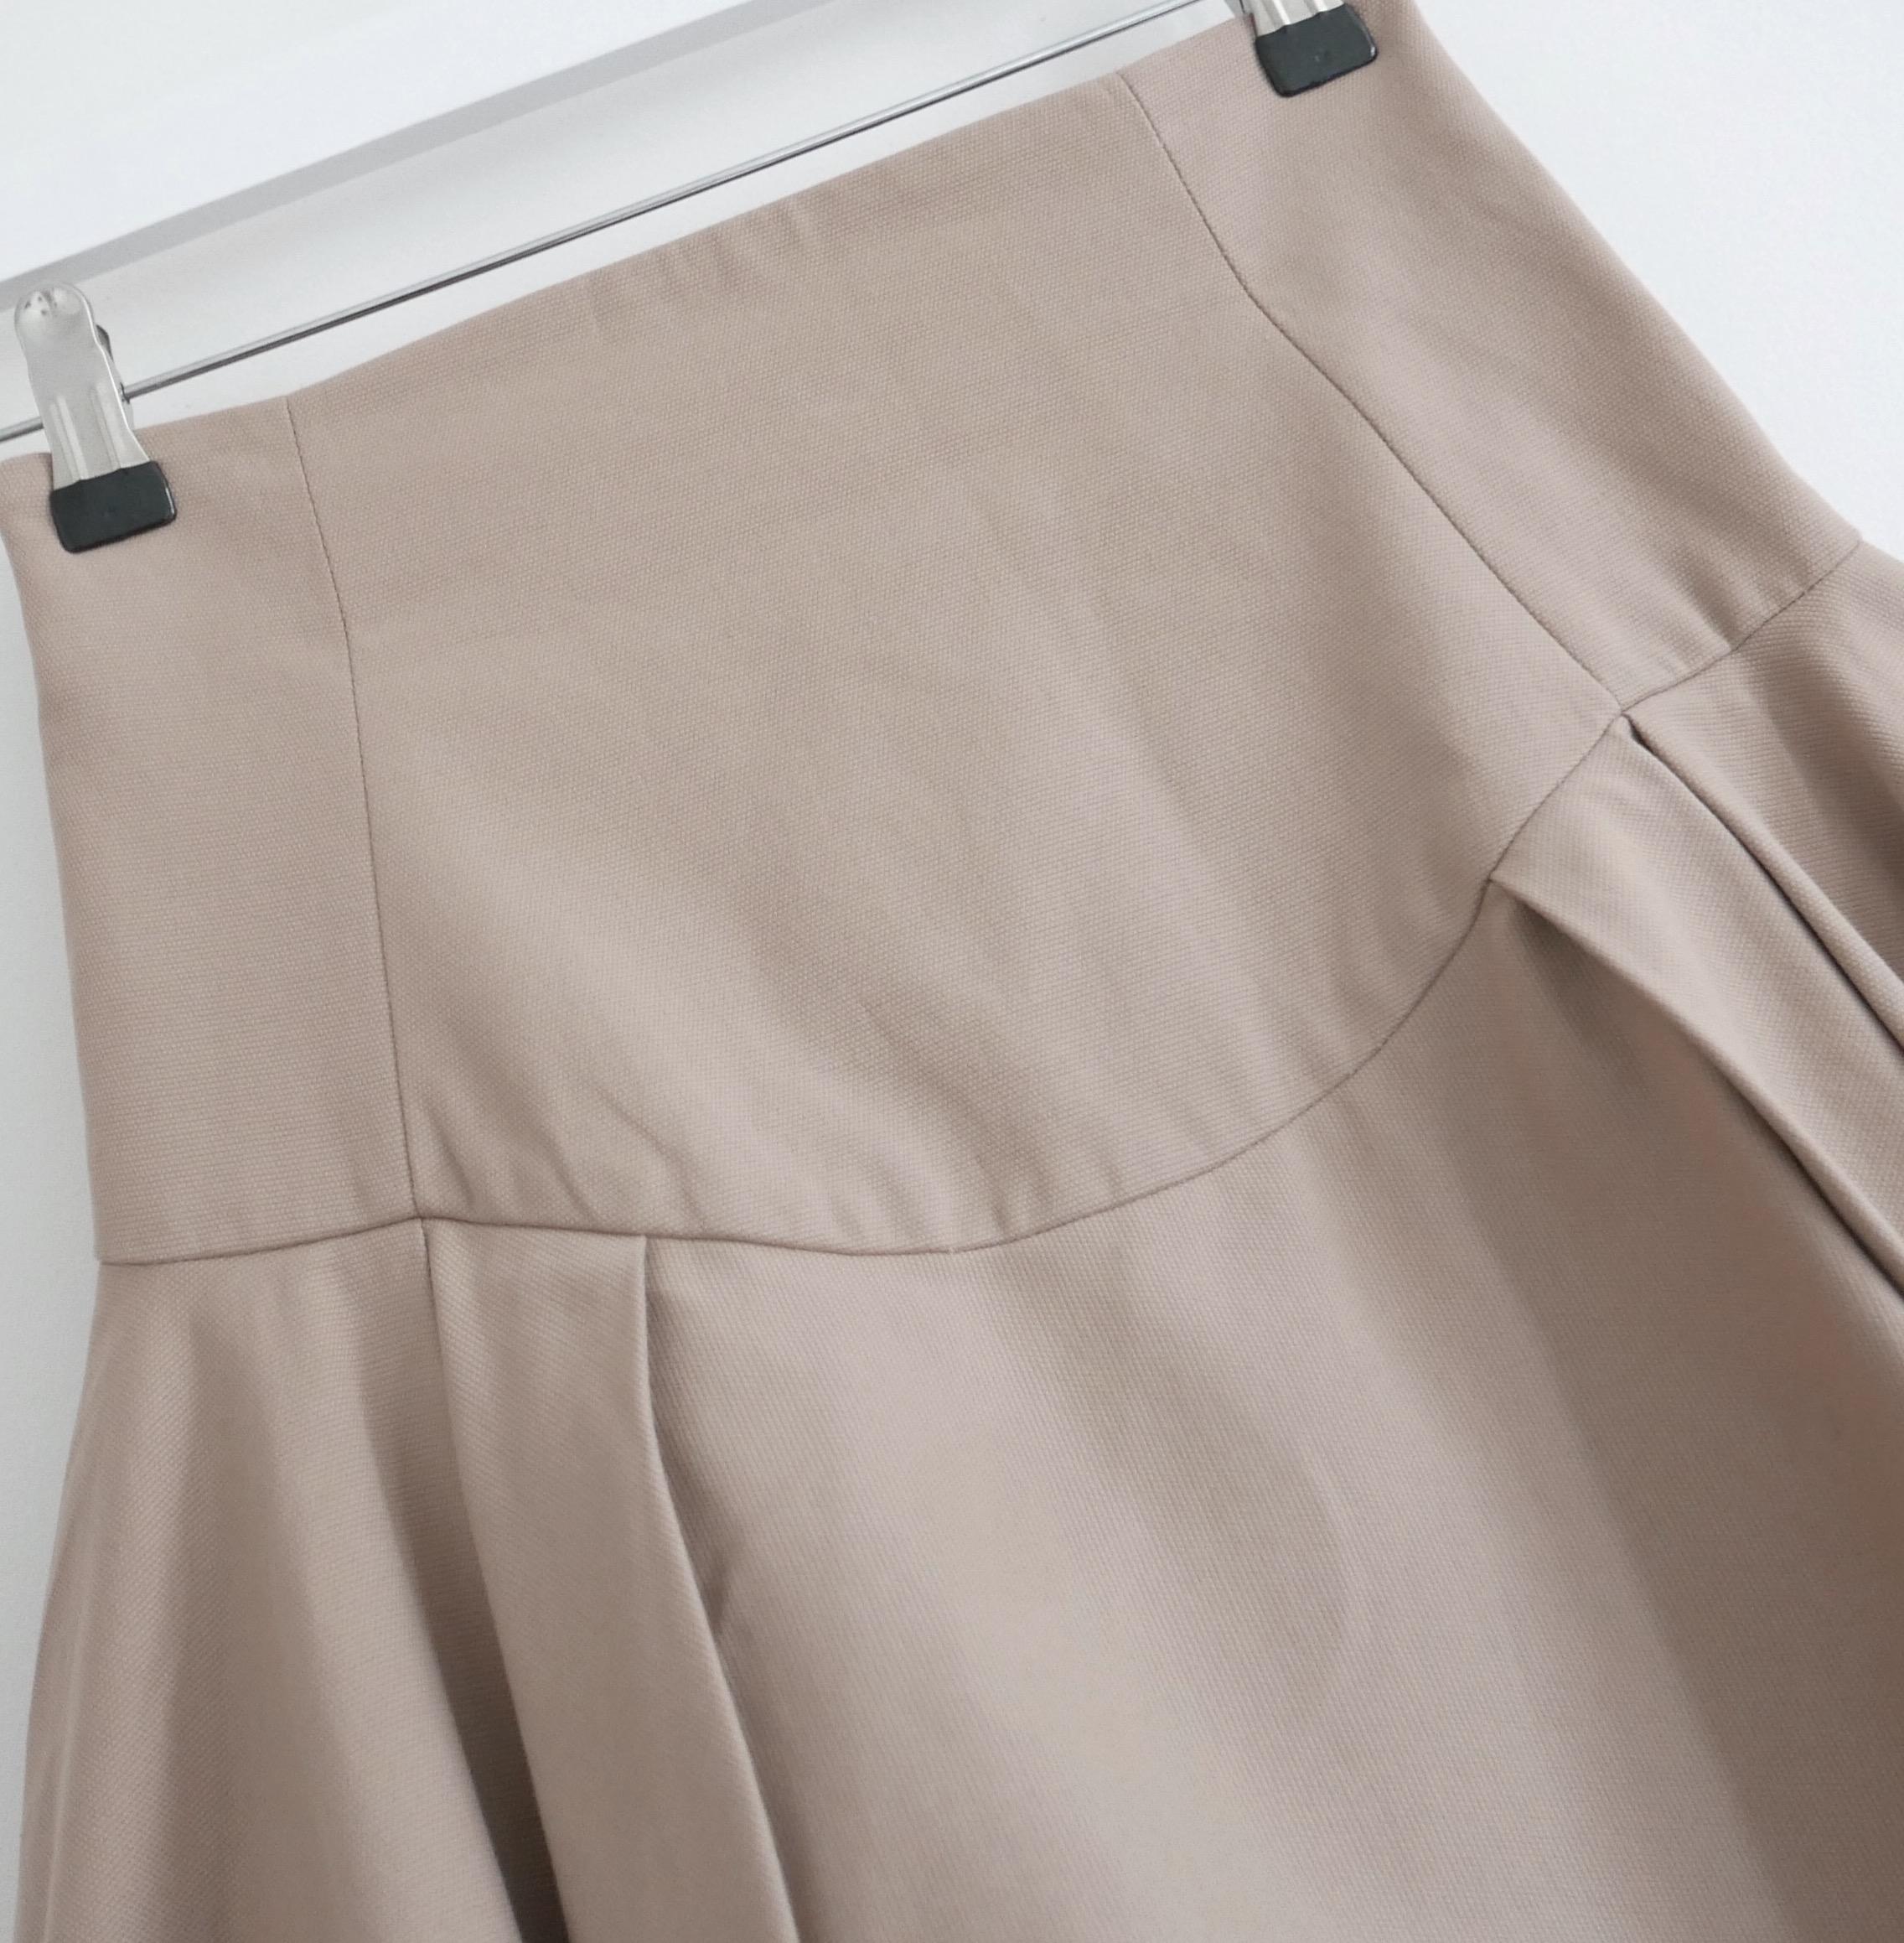 Alexander McQueen super flared skirt  In Excellent Condition For Sale In London, GB